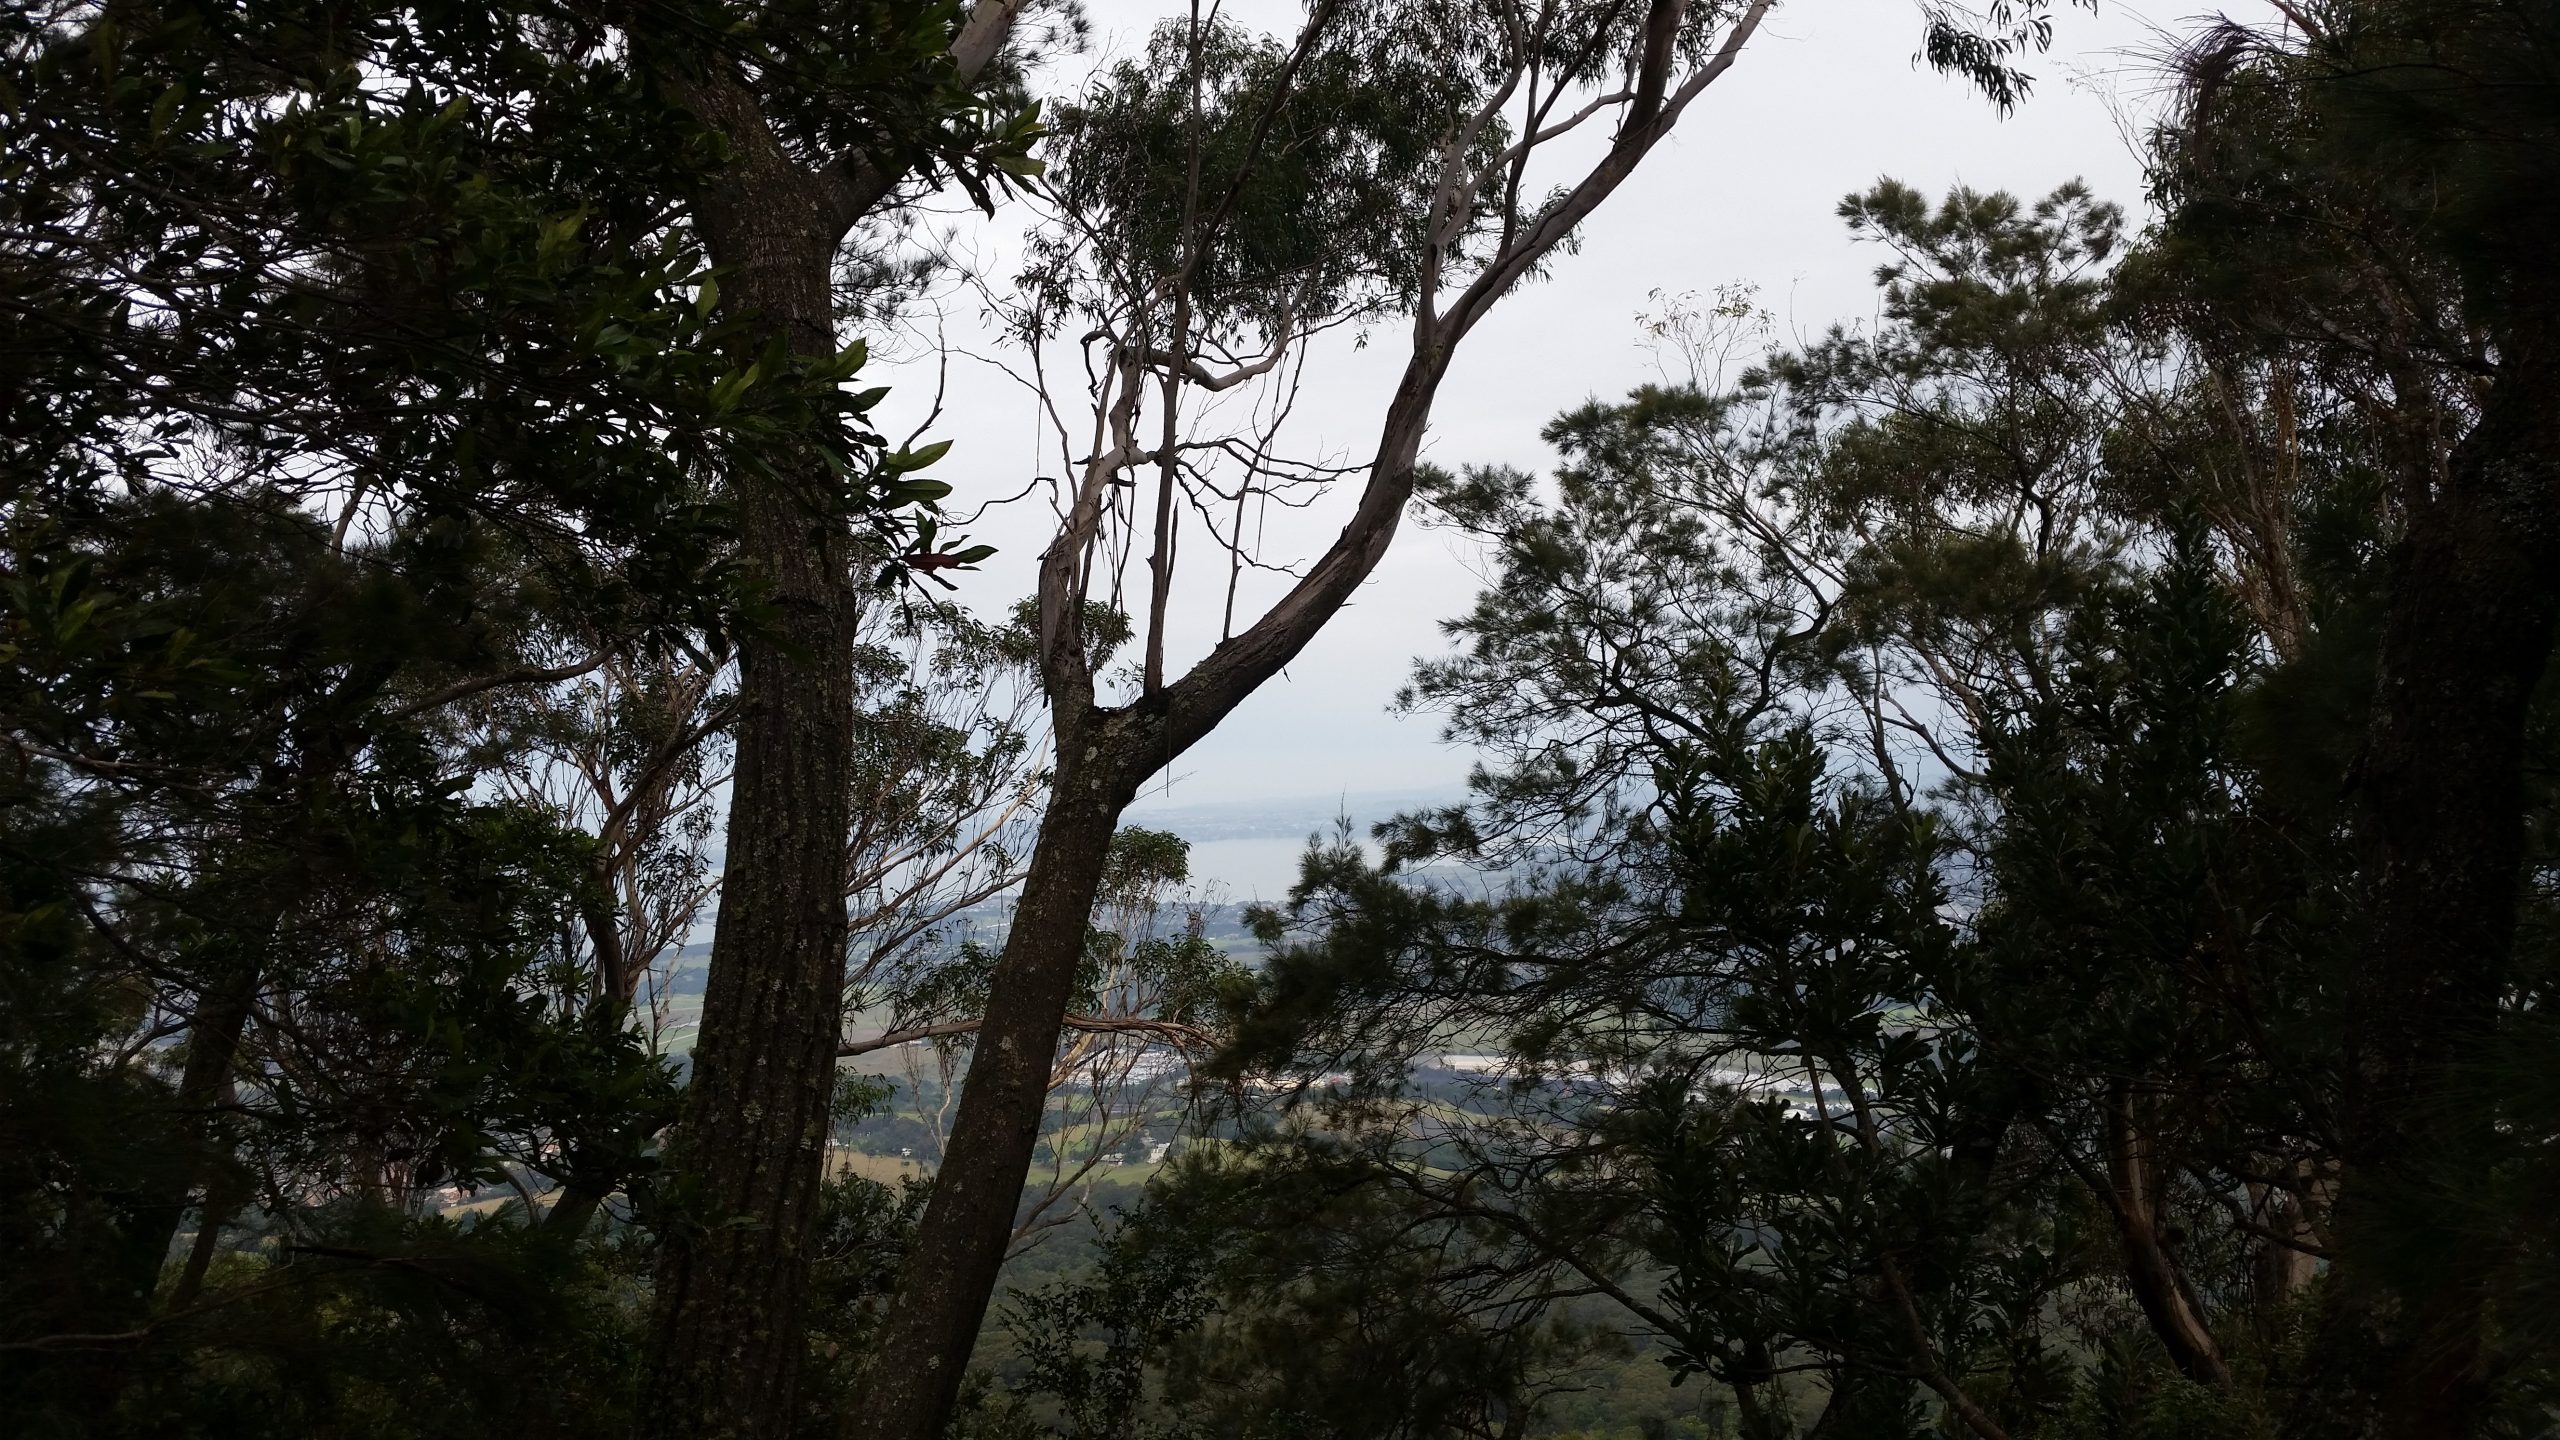 Enjoy the walk to the summit and take in glimpses of views to Lake Illawarra and the coastline.